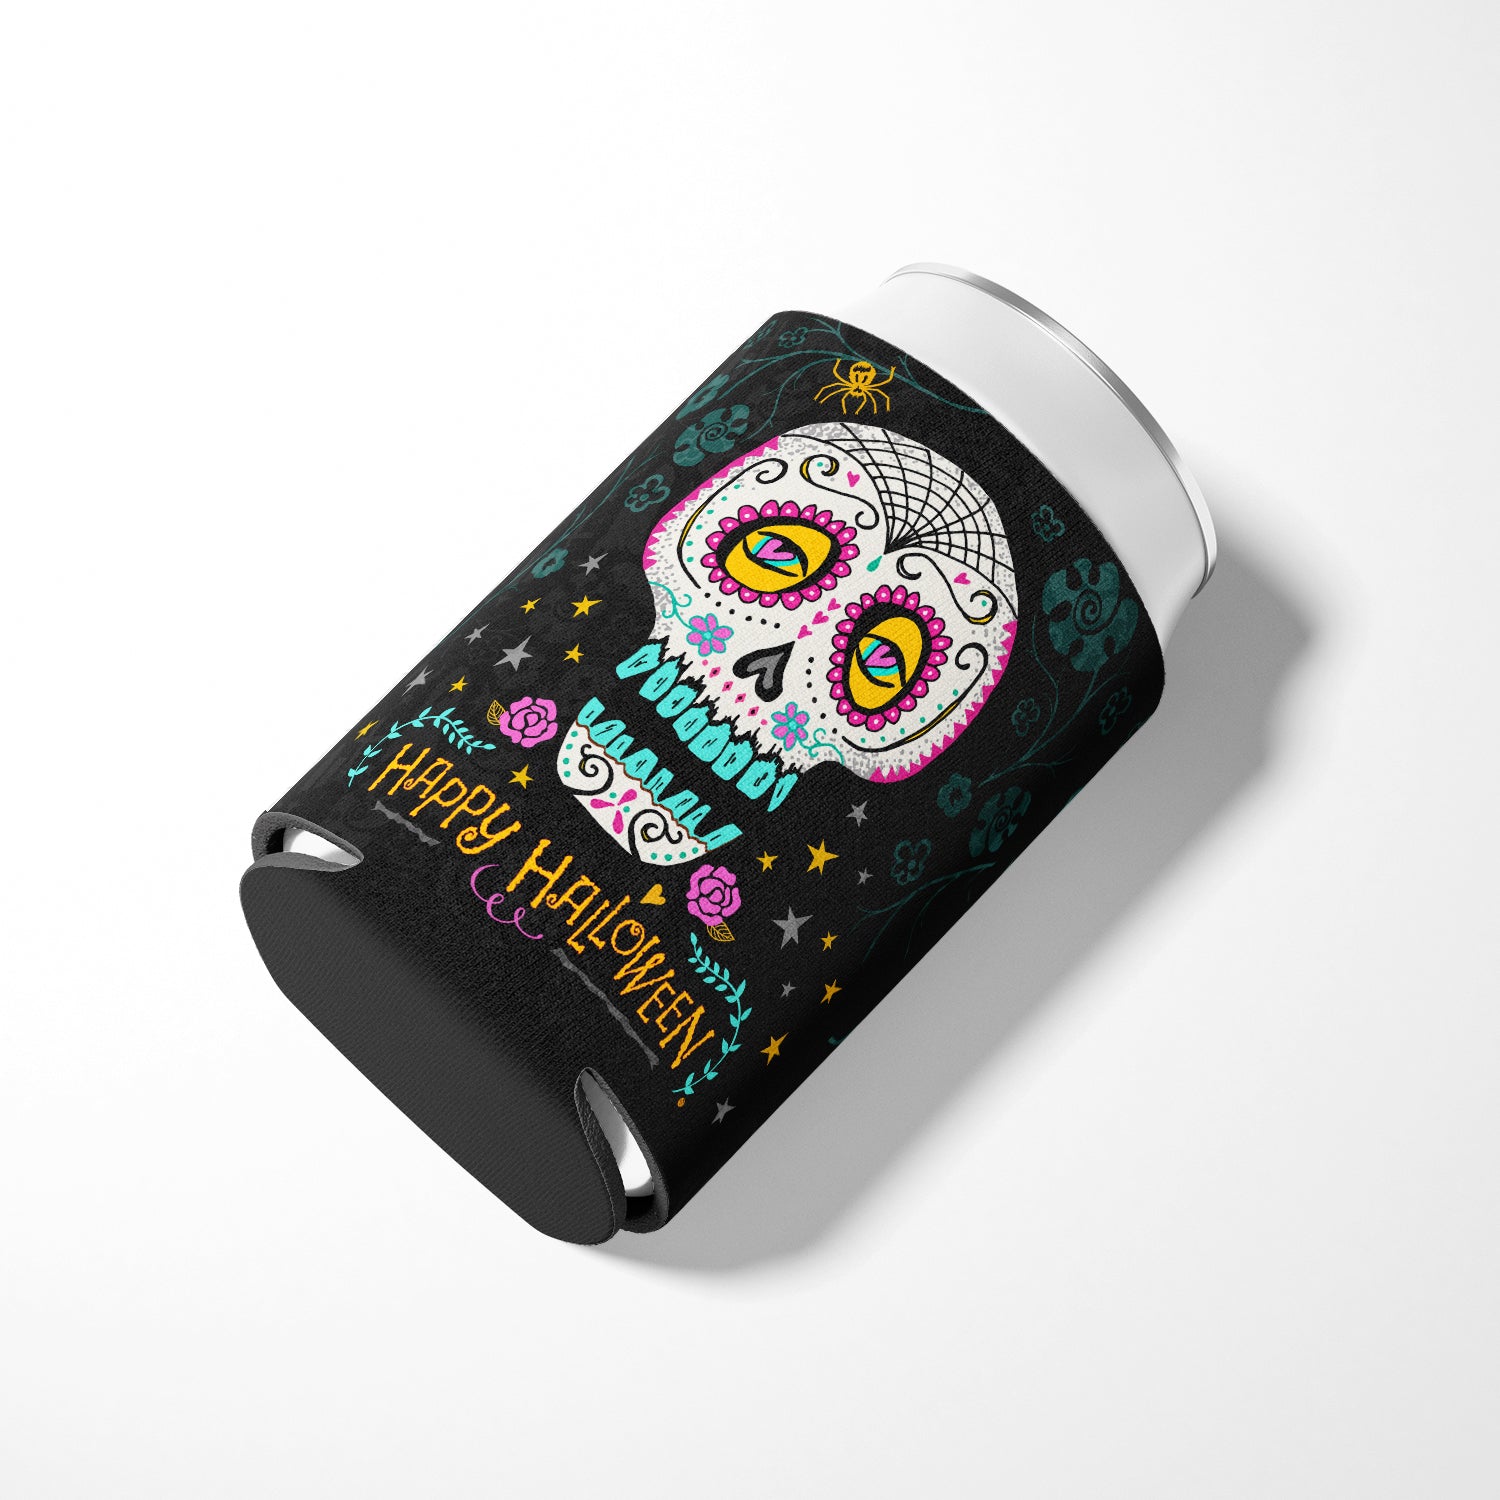 Happy Halloween Day of the Dead Can or Bottle Hugger VHA3035CC